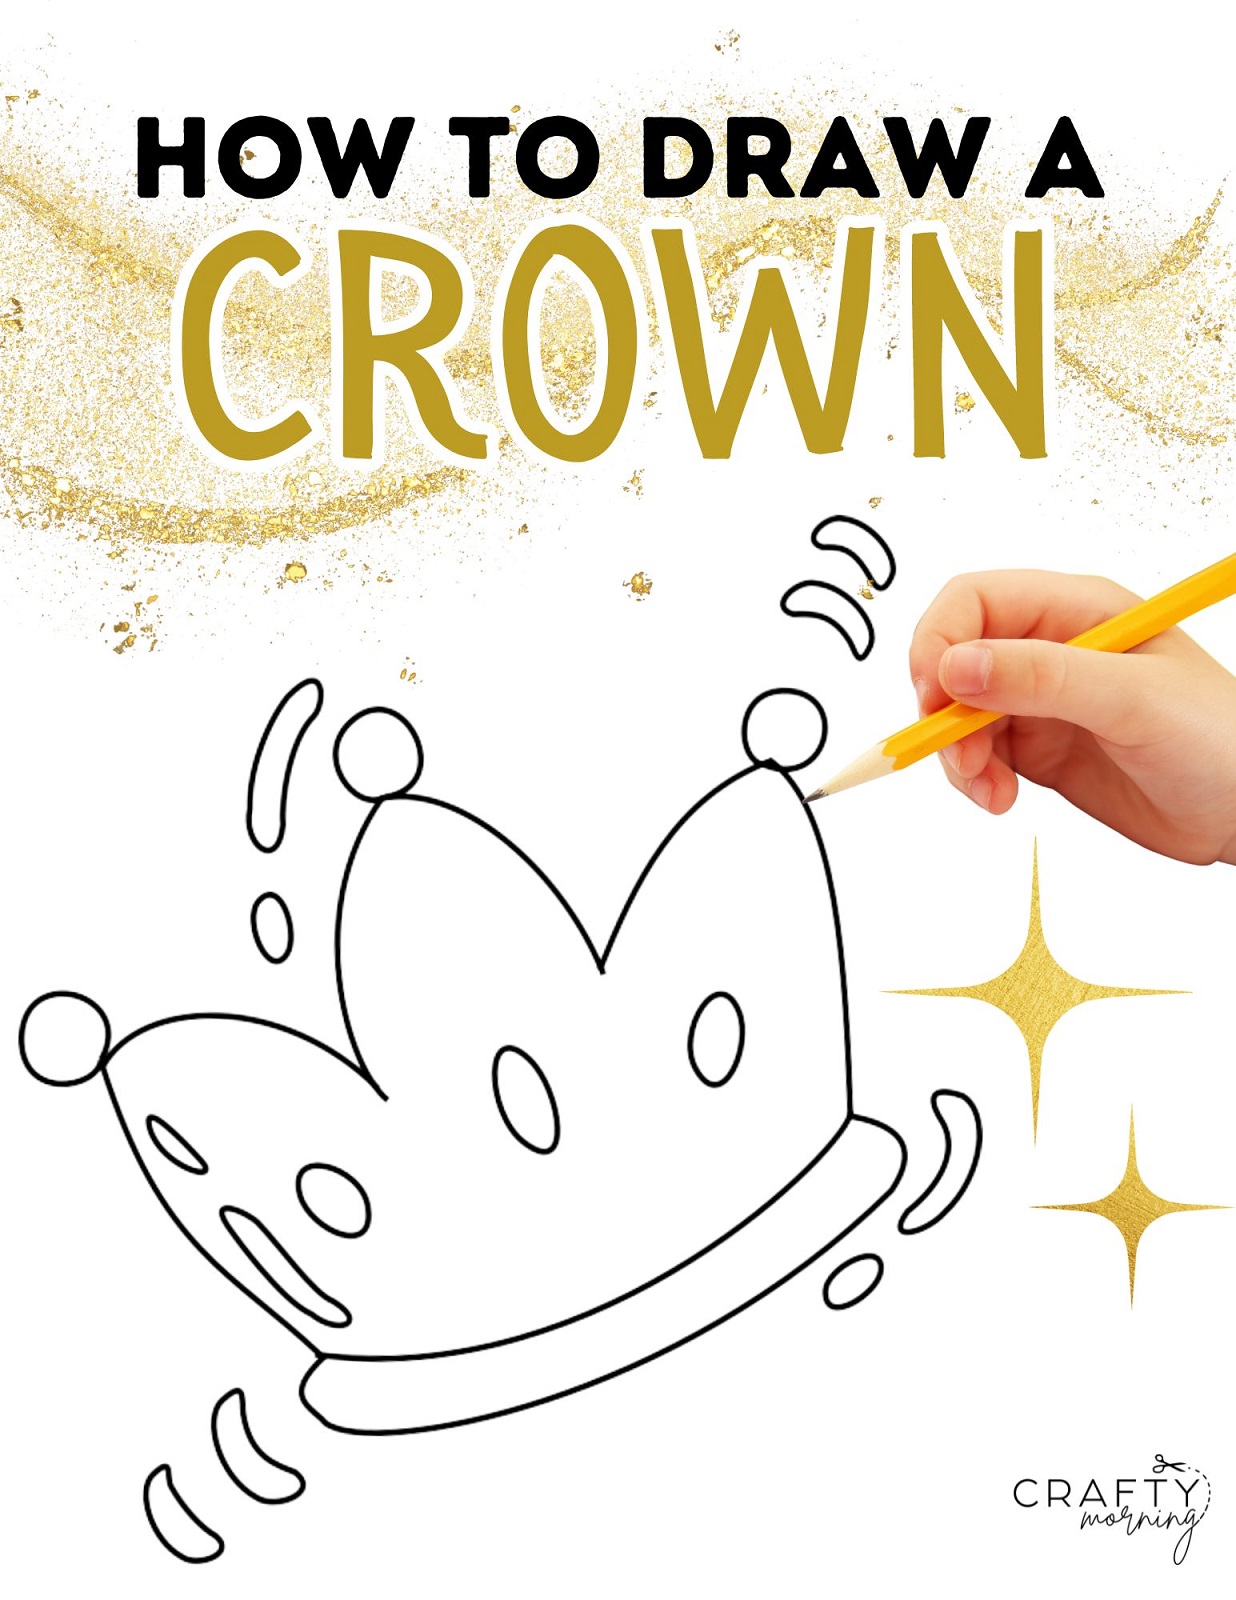 How to Draw a King Step by Step | Art drawings for kids, Drawing lessons  for kids, Easy drawings for kids